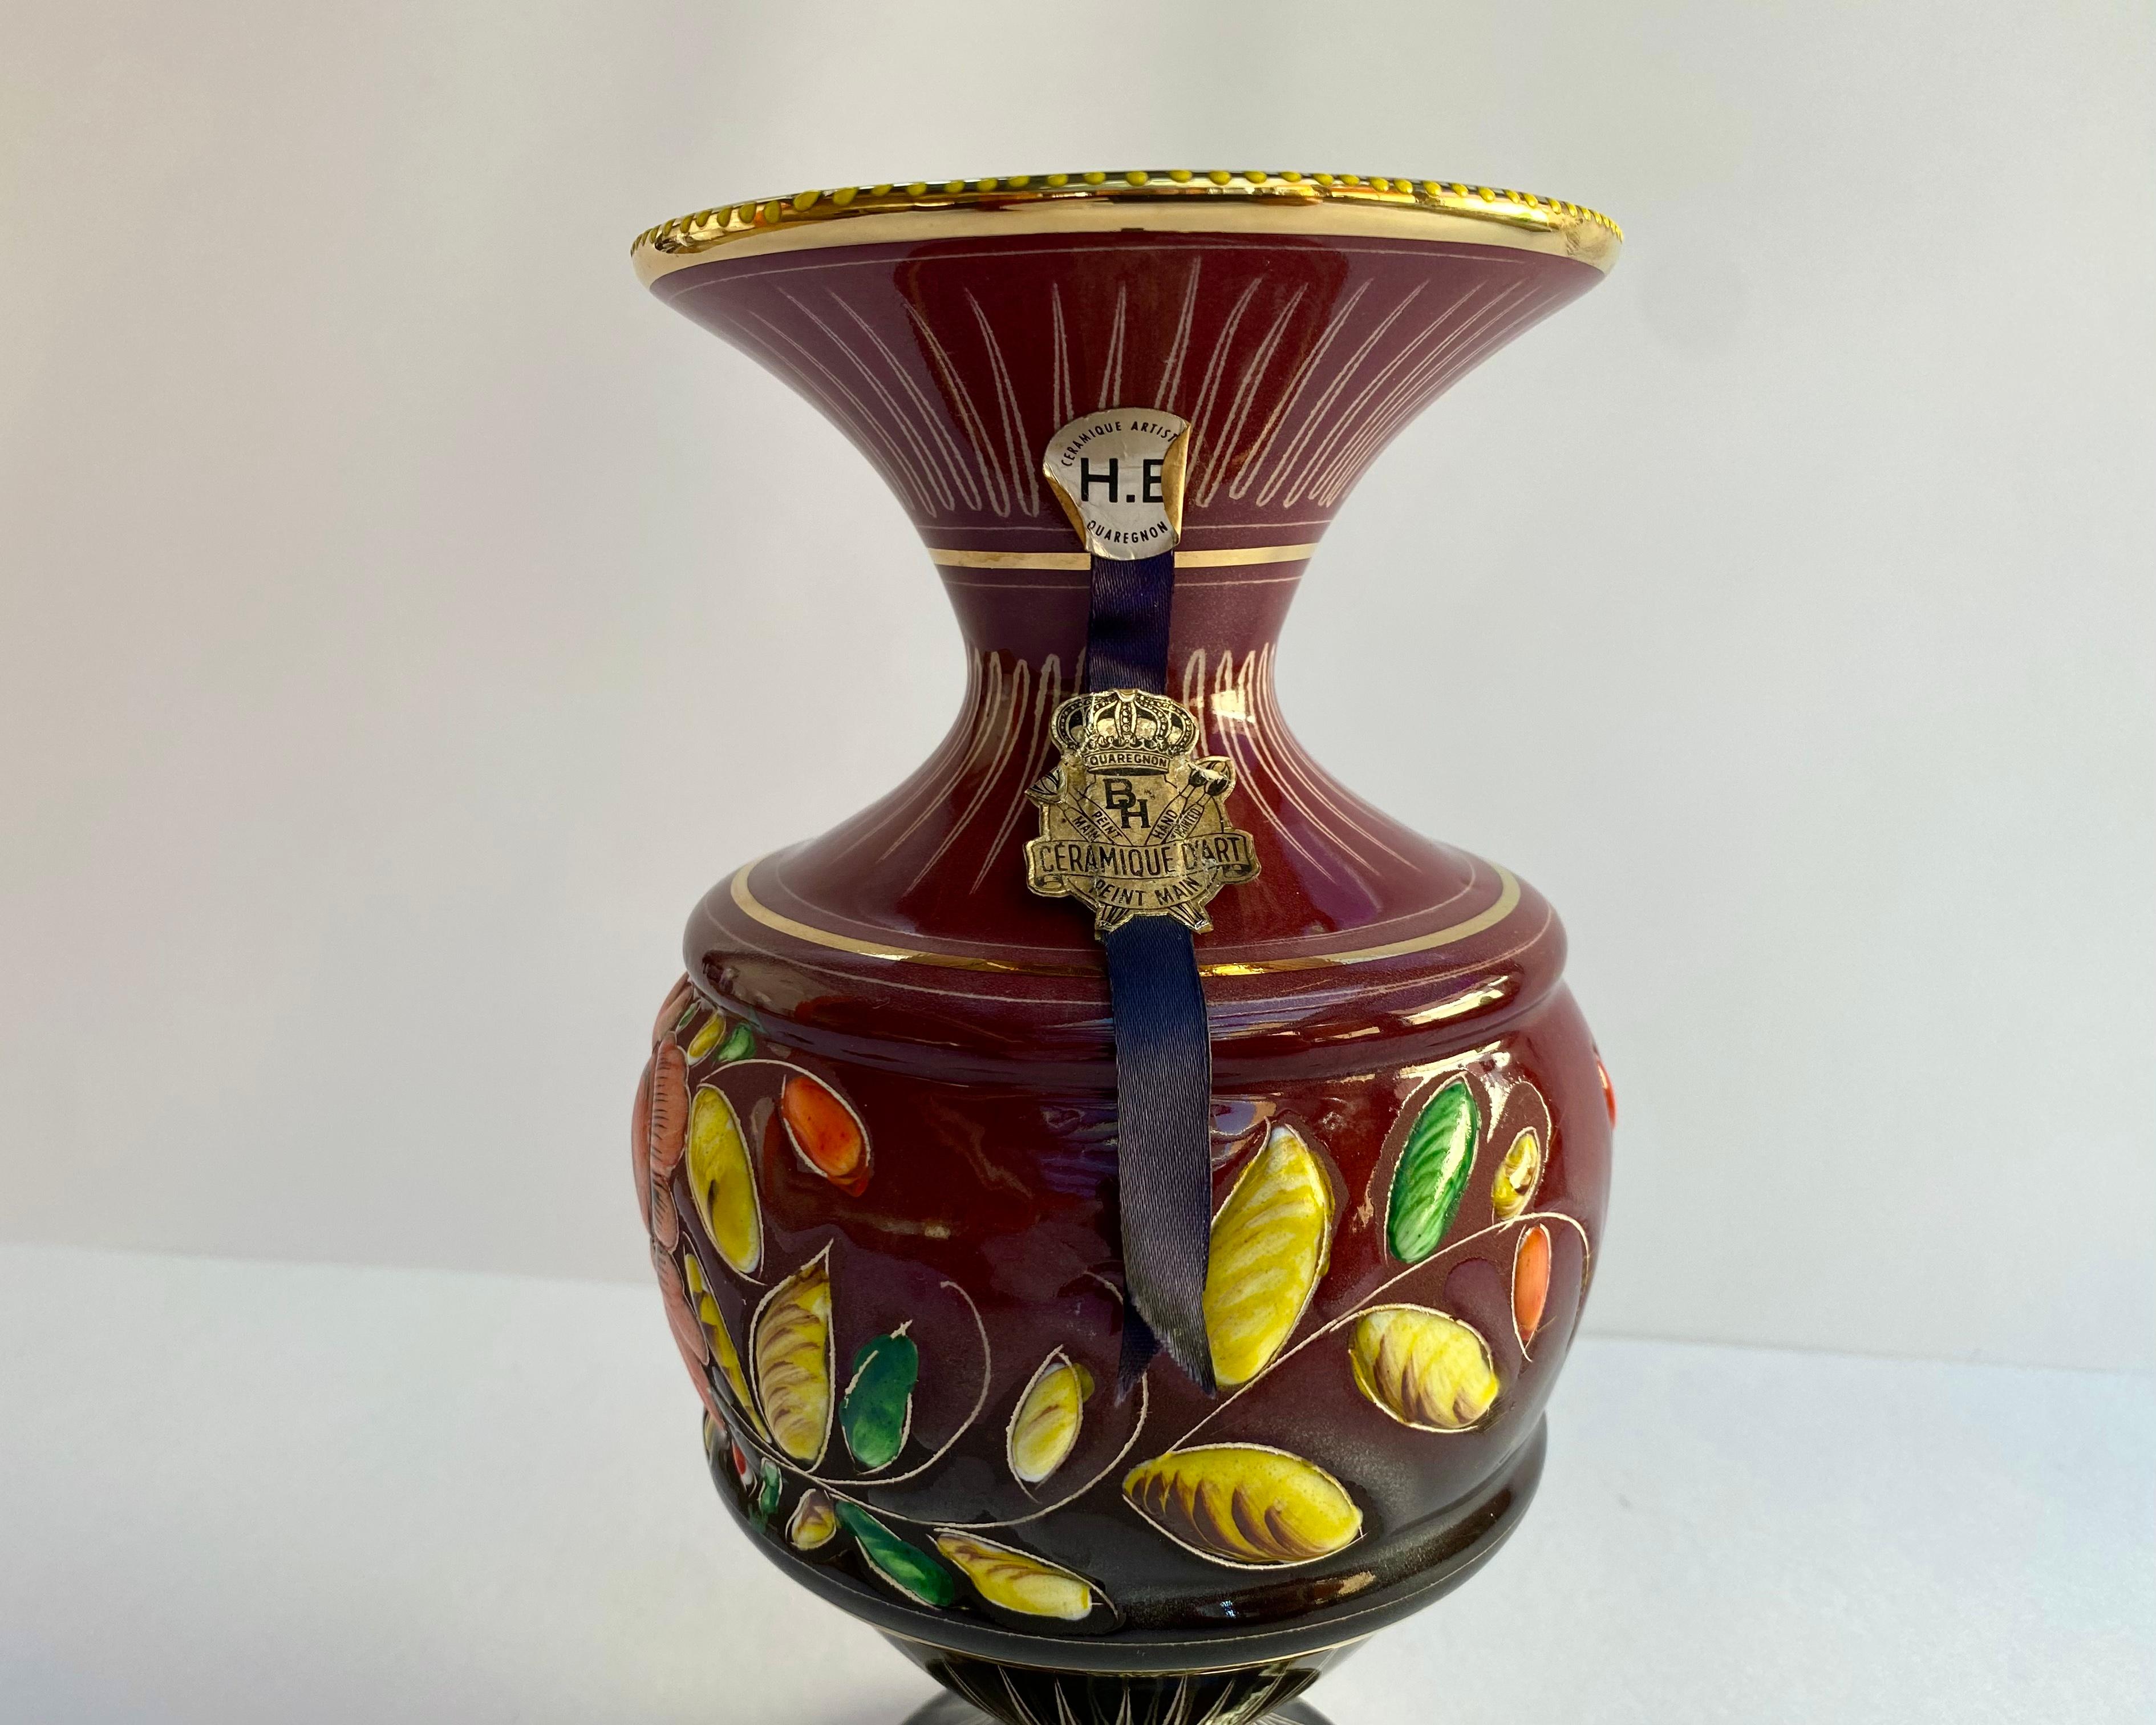 From the 1950s, attributed to Hubert Bequet Quaregnon ceramic vase with a beautifull burgundy background decorated with a bright colorful raised enamel pattern of a colorful flowers.  

All hand crafted and hand painted.

All accents in 24k